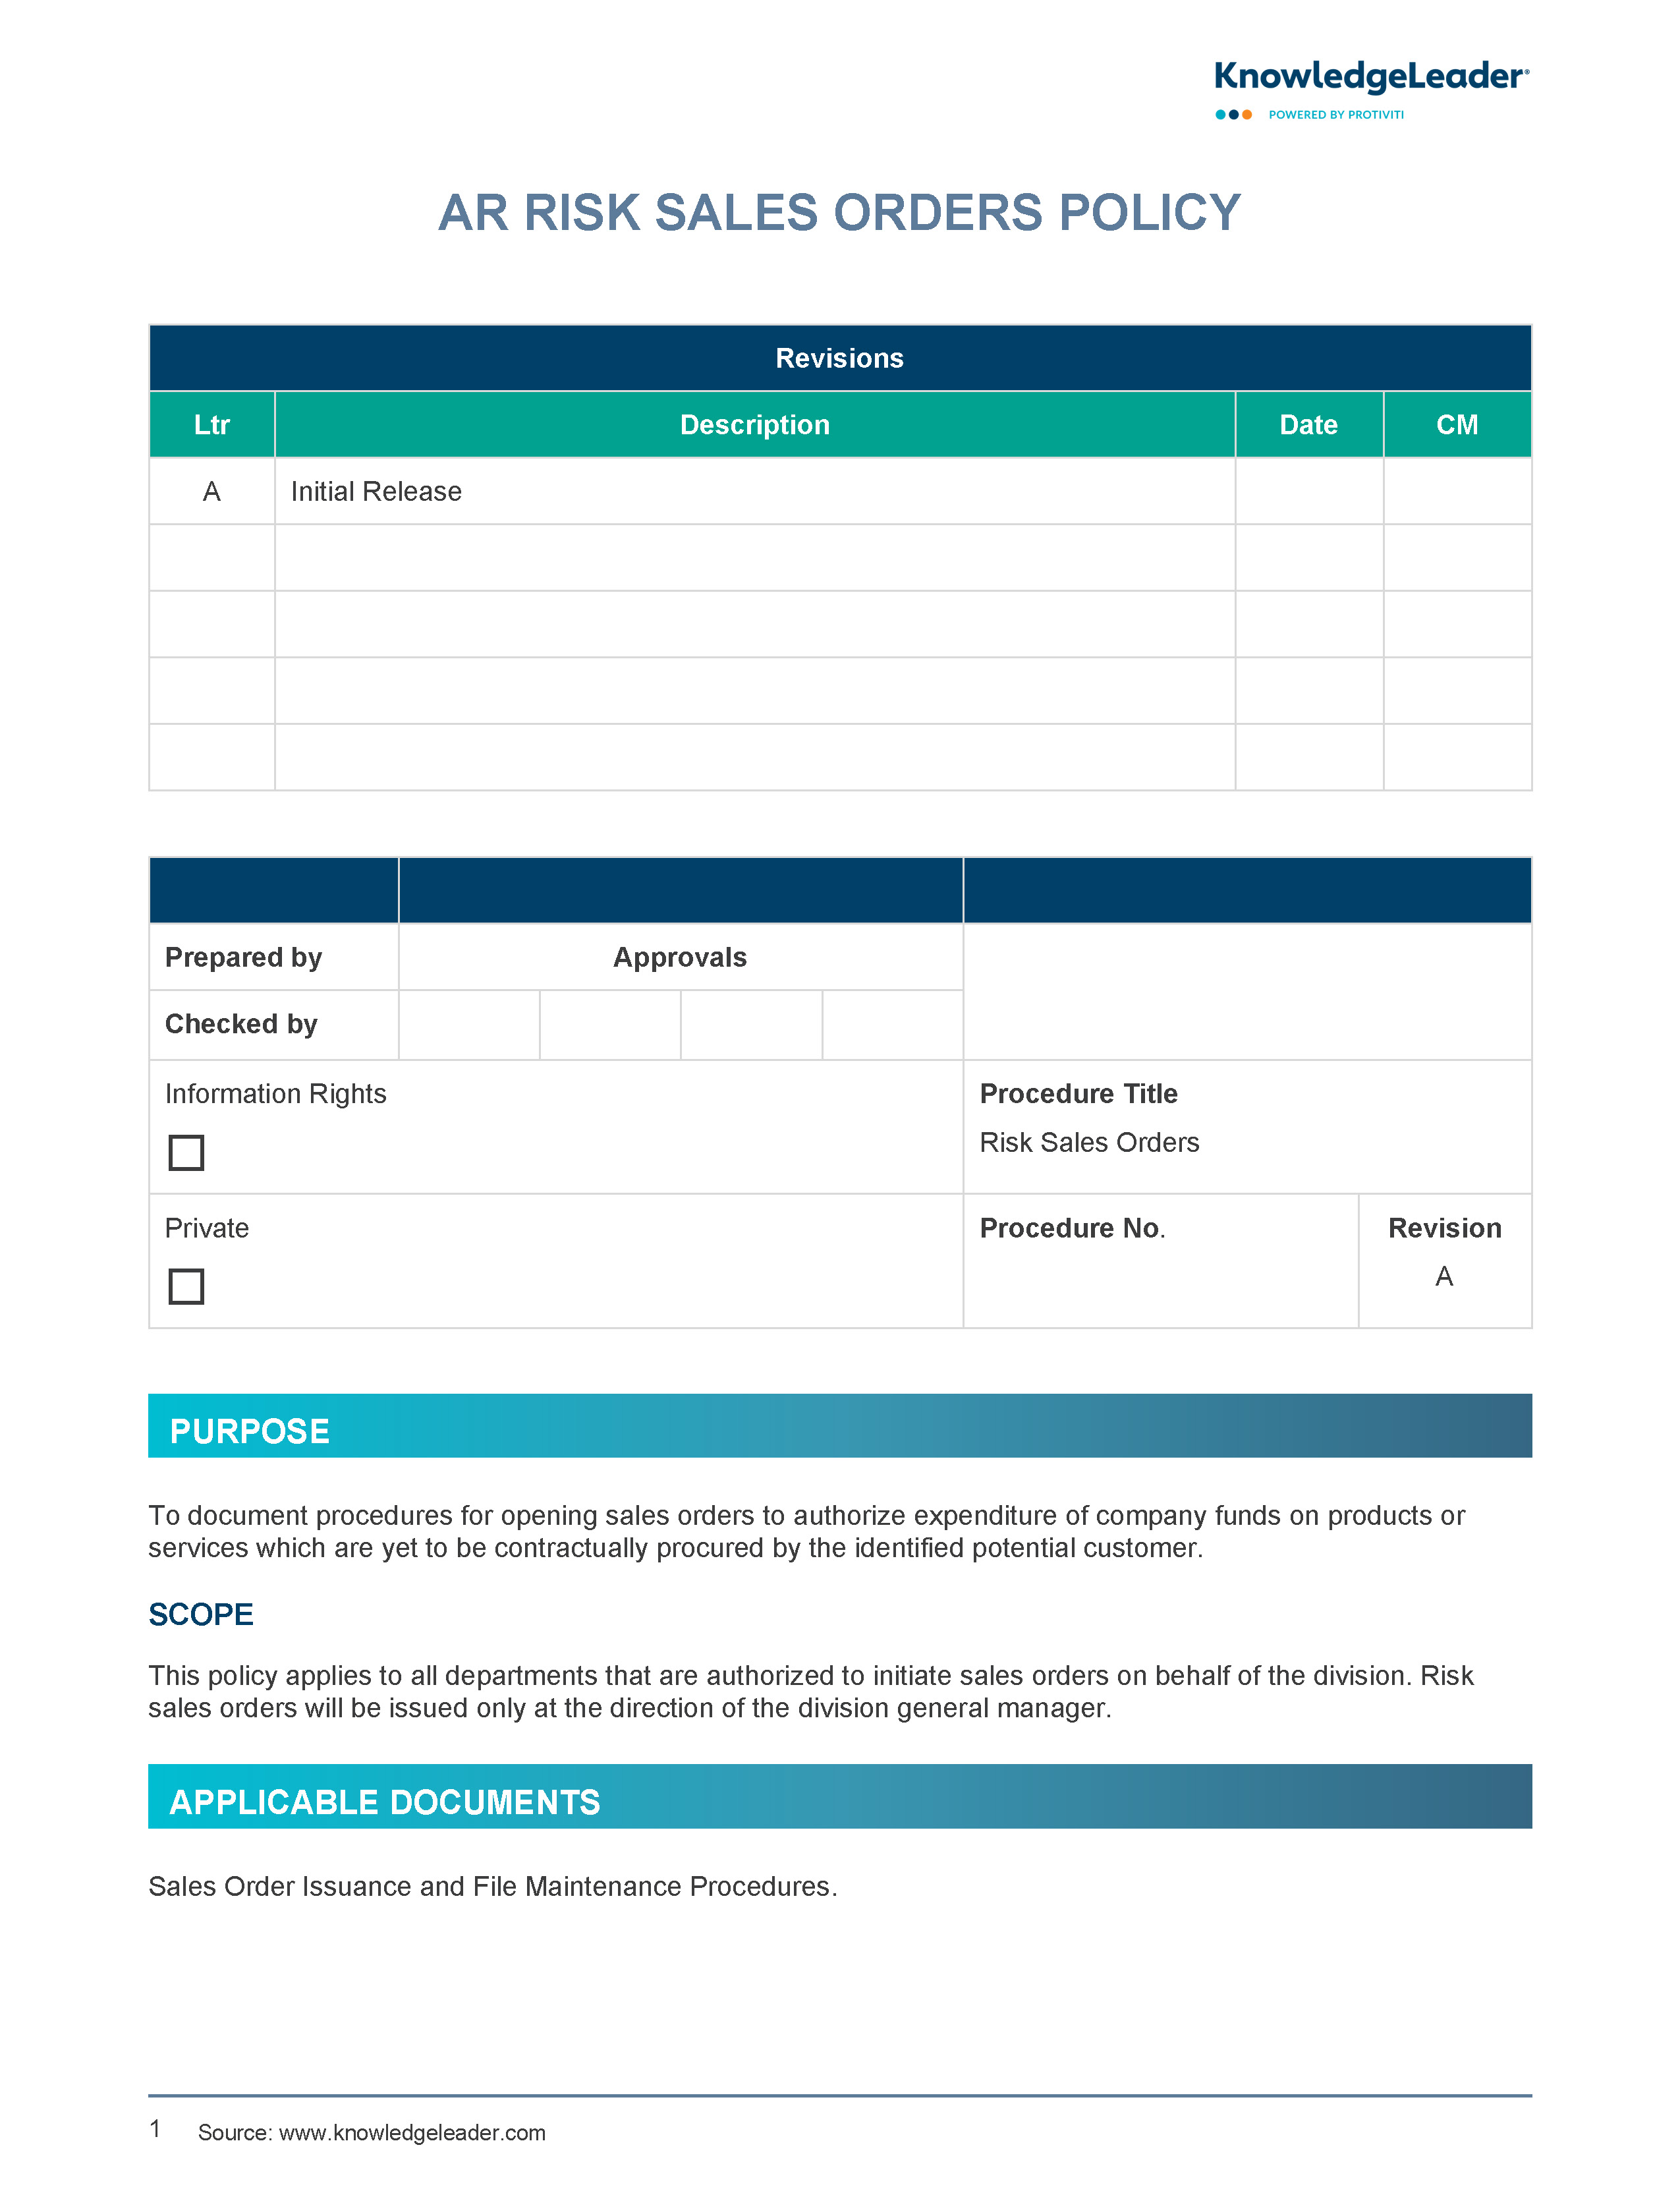 Screenshot of the first page of AR Risk Sales Orders Policy